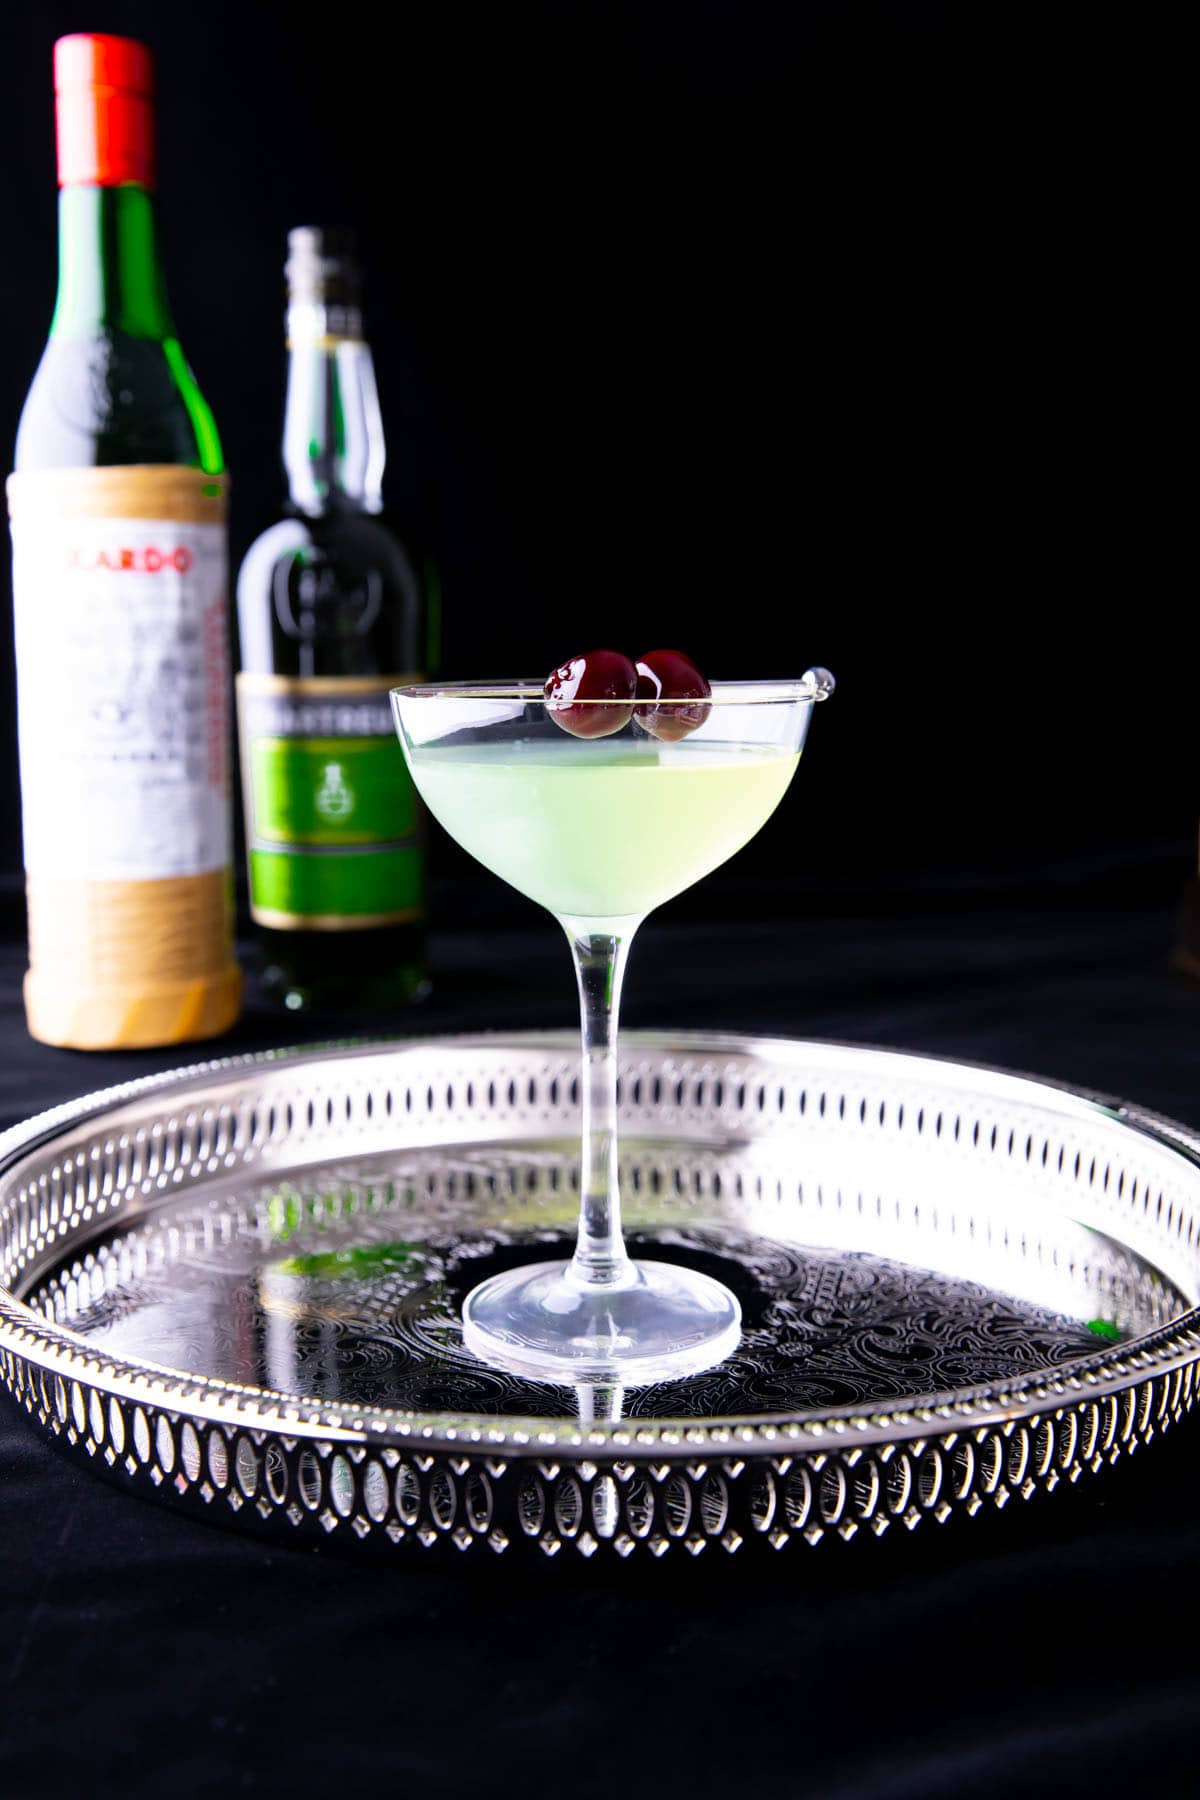 A bottle of Luxardo maraschino liqueur and Green Chartreuse with a serving tray of this cocktail